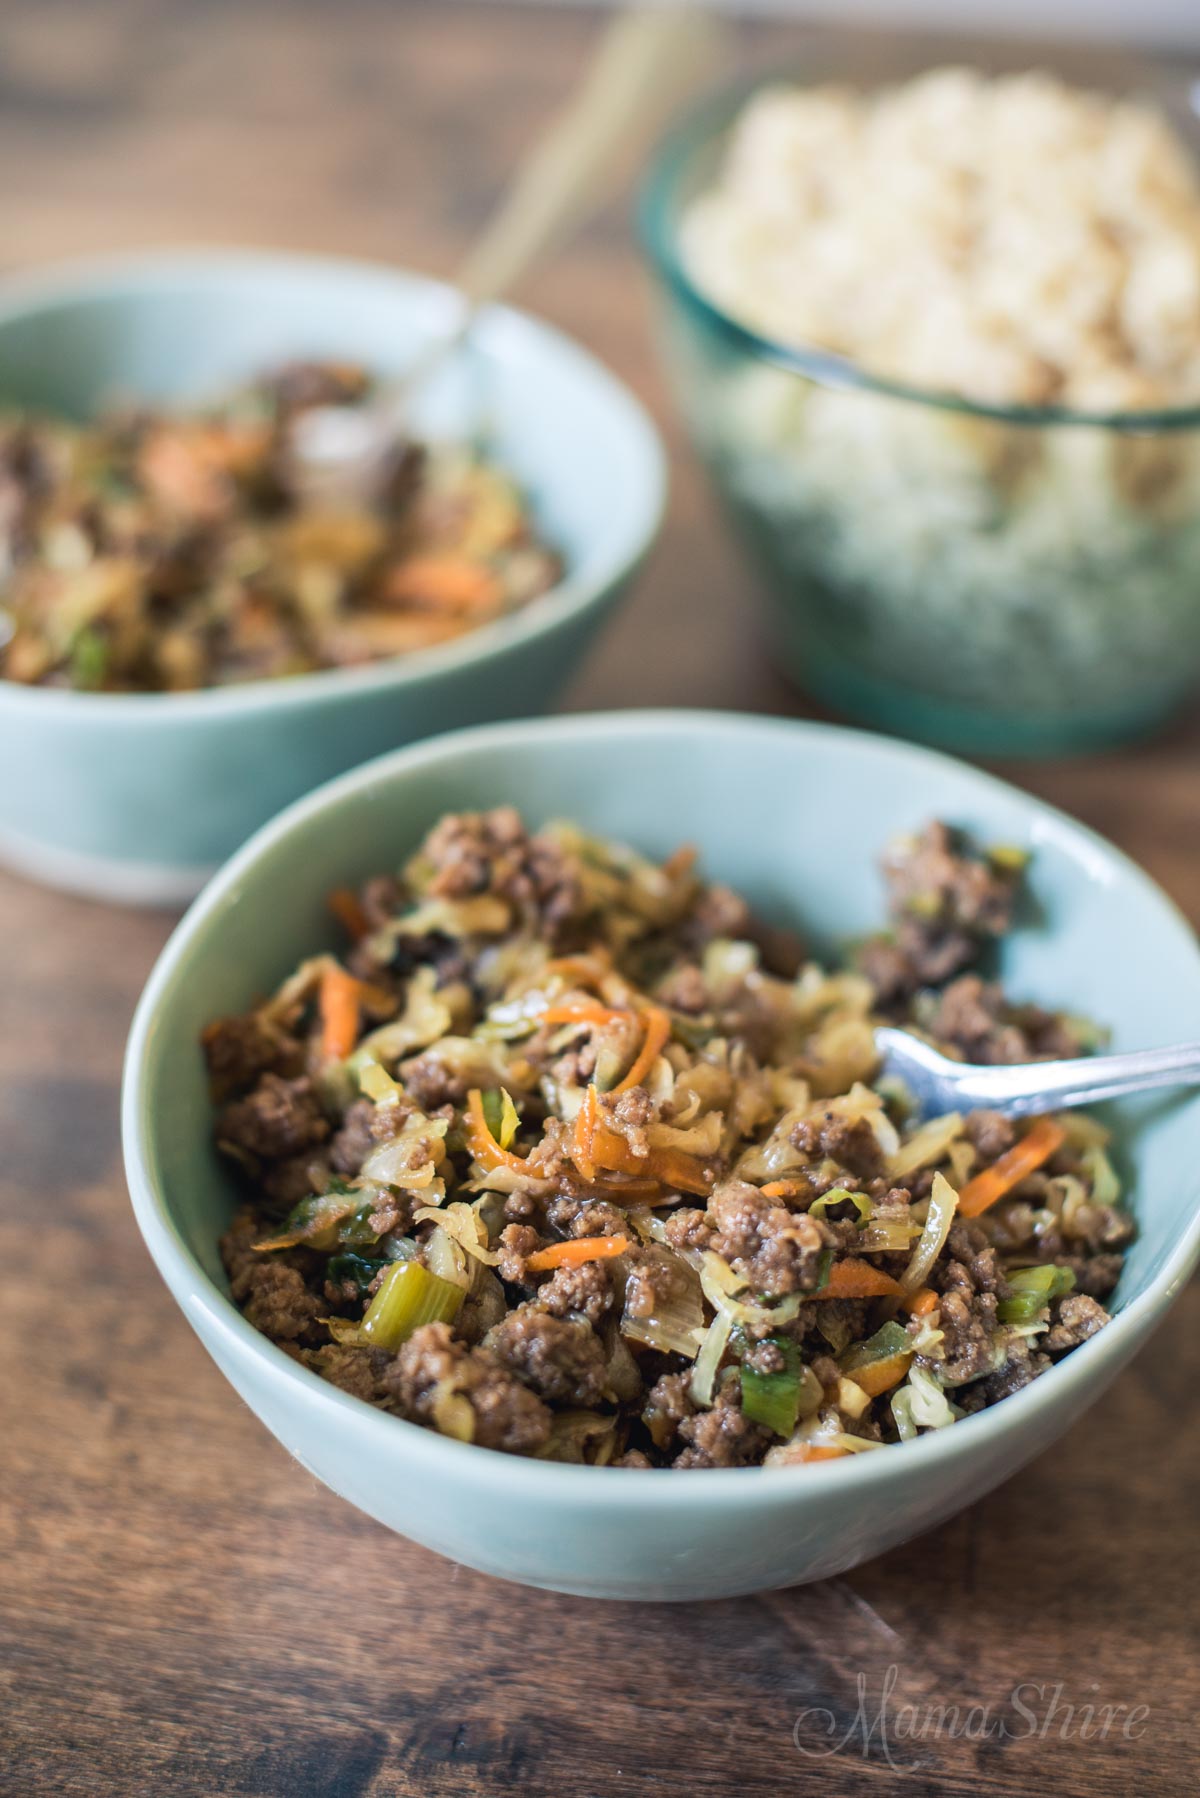 Mongolian Beef Egg Roll in a Bowl - Gluten-free, Low-carb, THM-FP